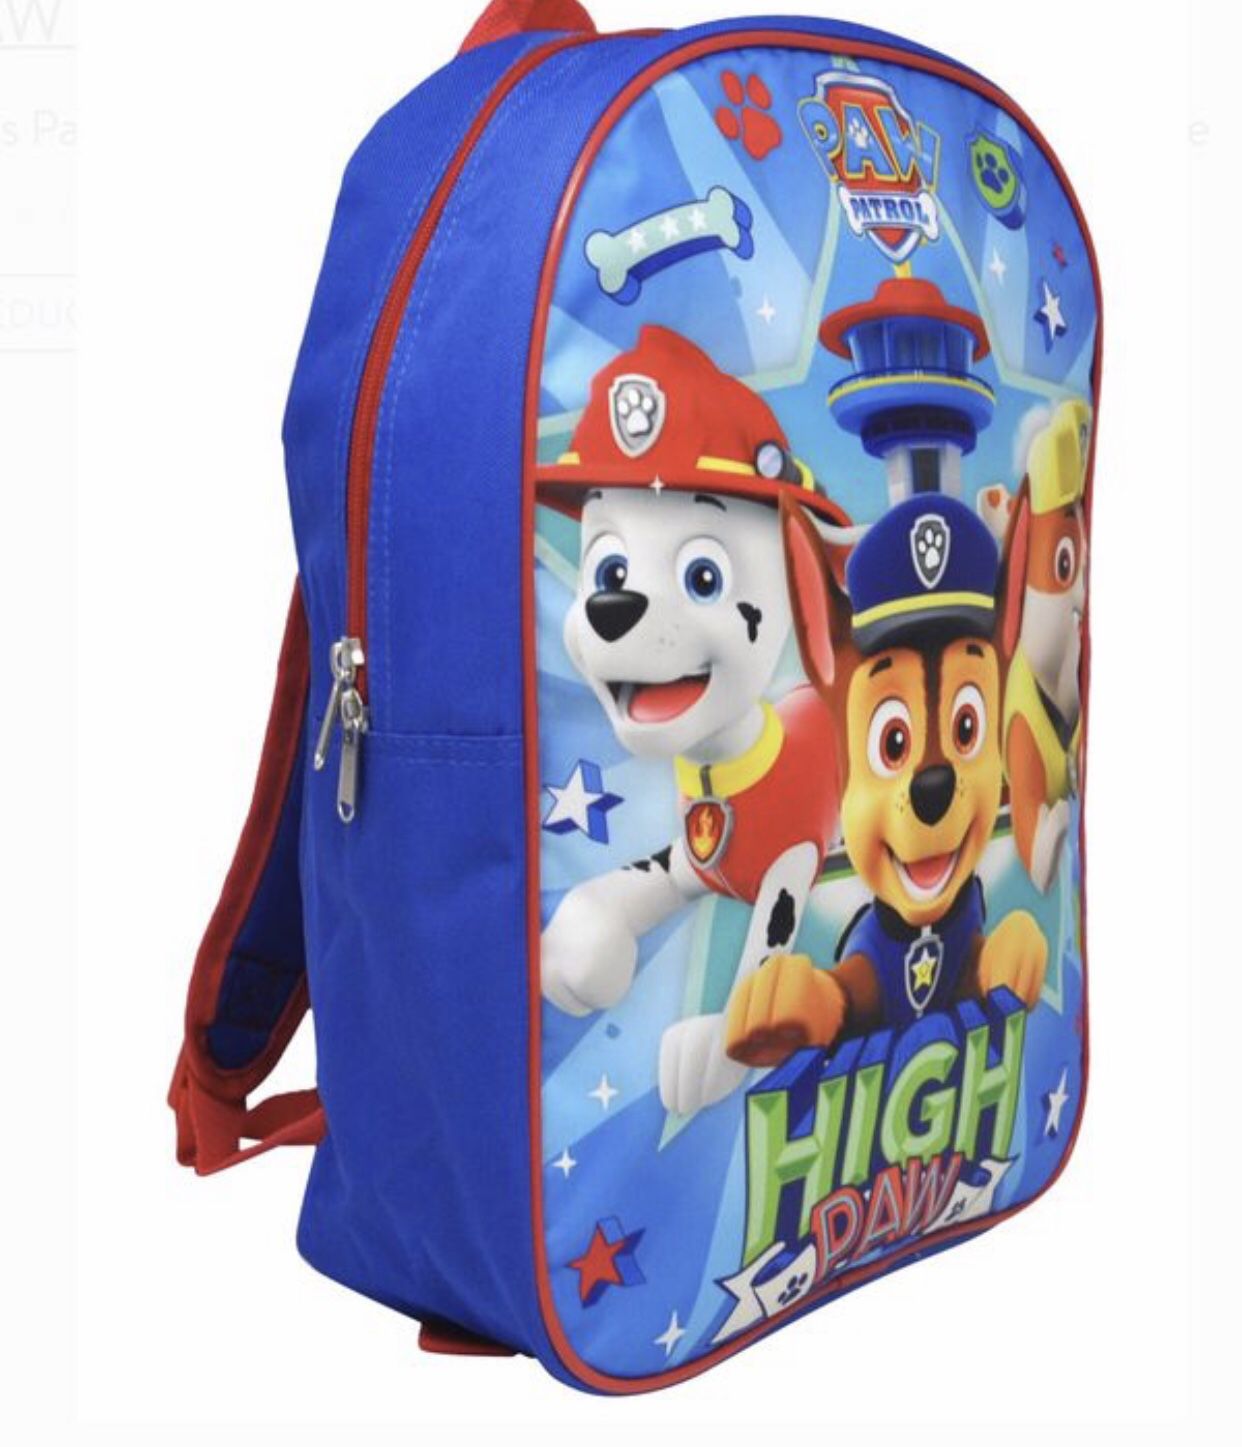 Boys Paw Patrol Backpack 15". + A pencil case Perfect for pencils, pens, crayons, paperclips,